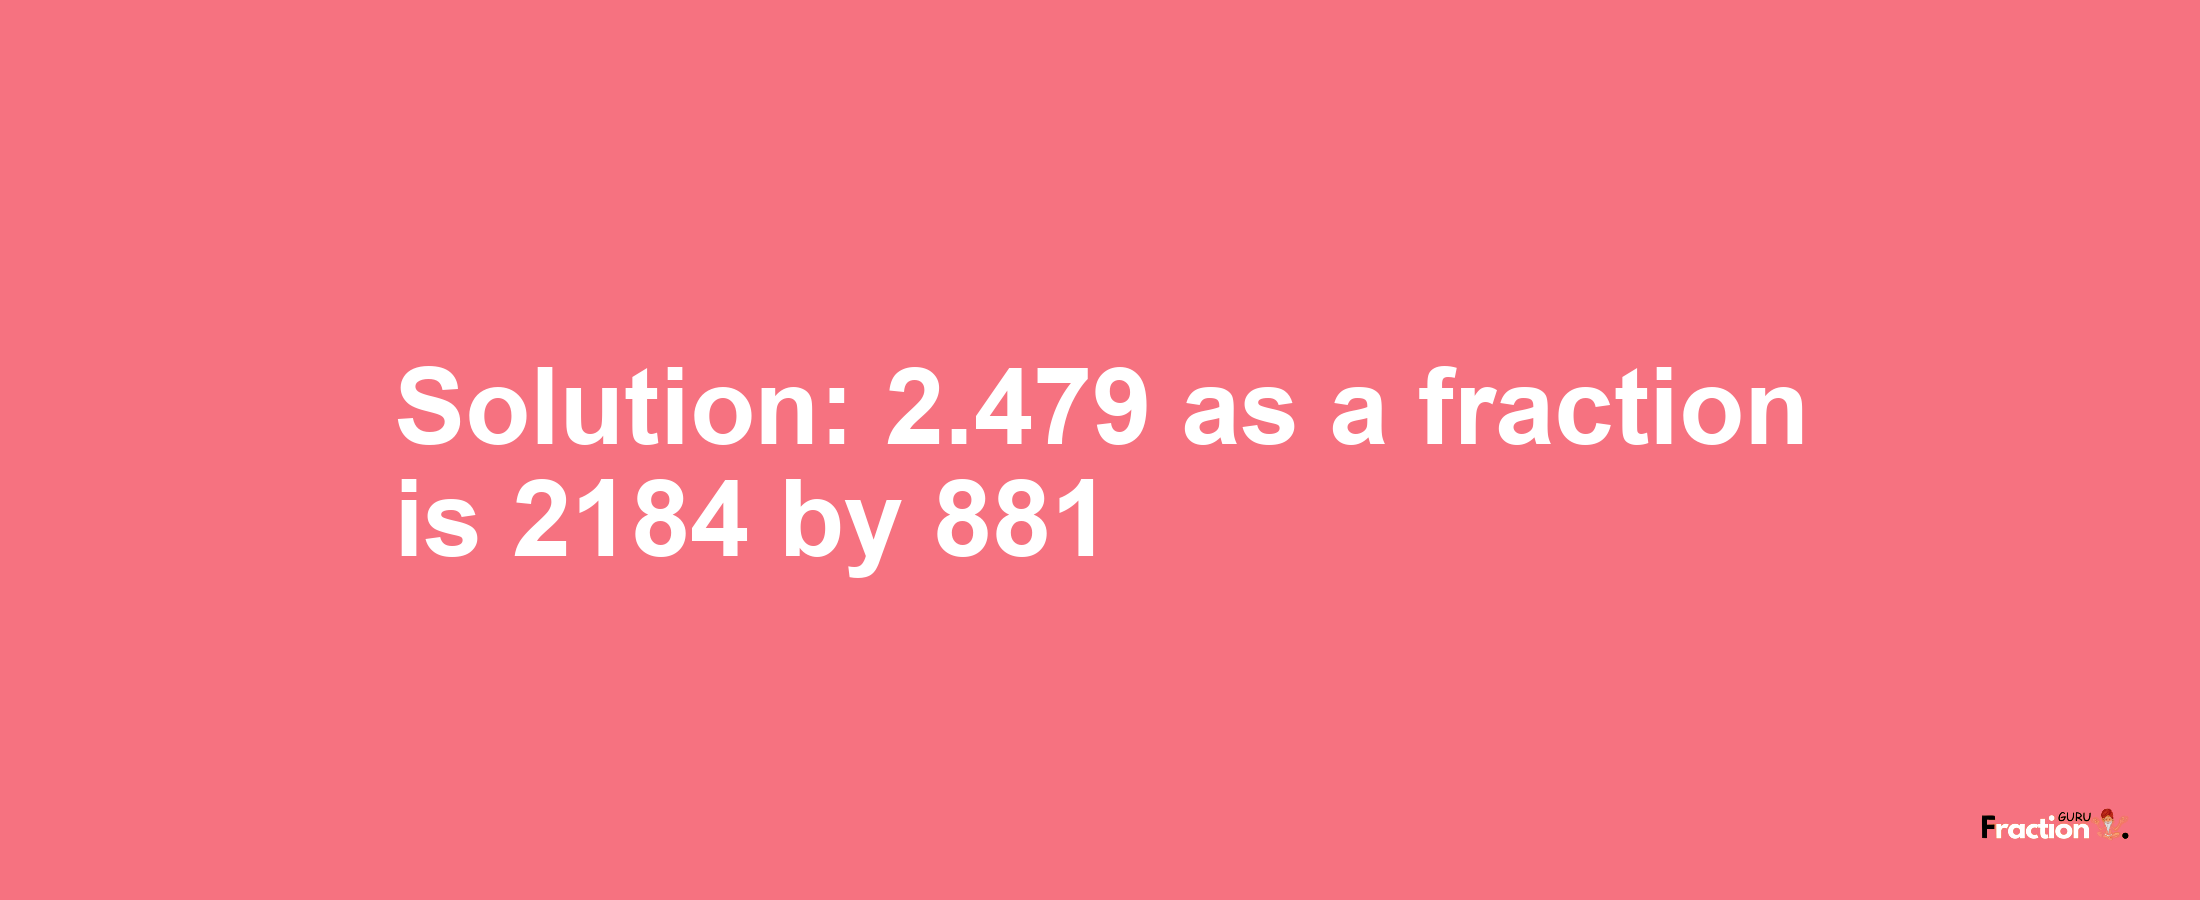 Solution:2.479 as a fraction is 2184/881